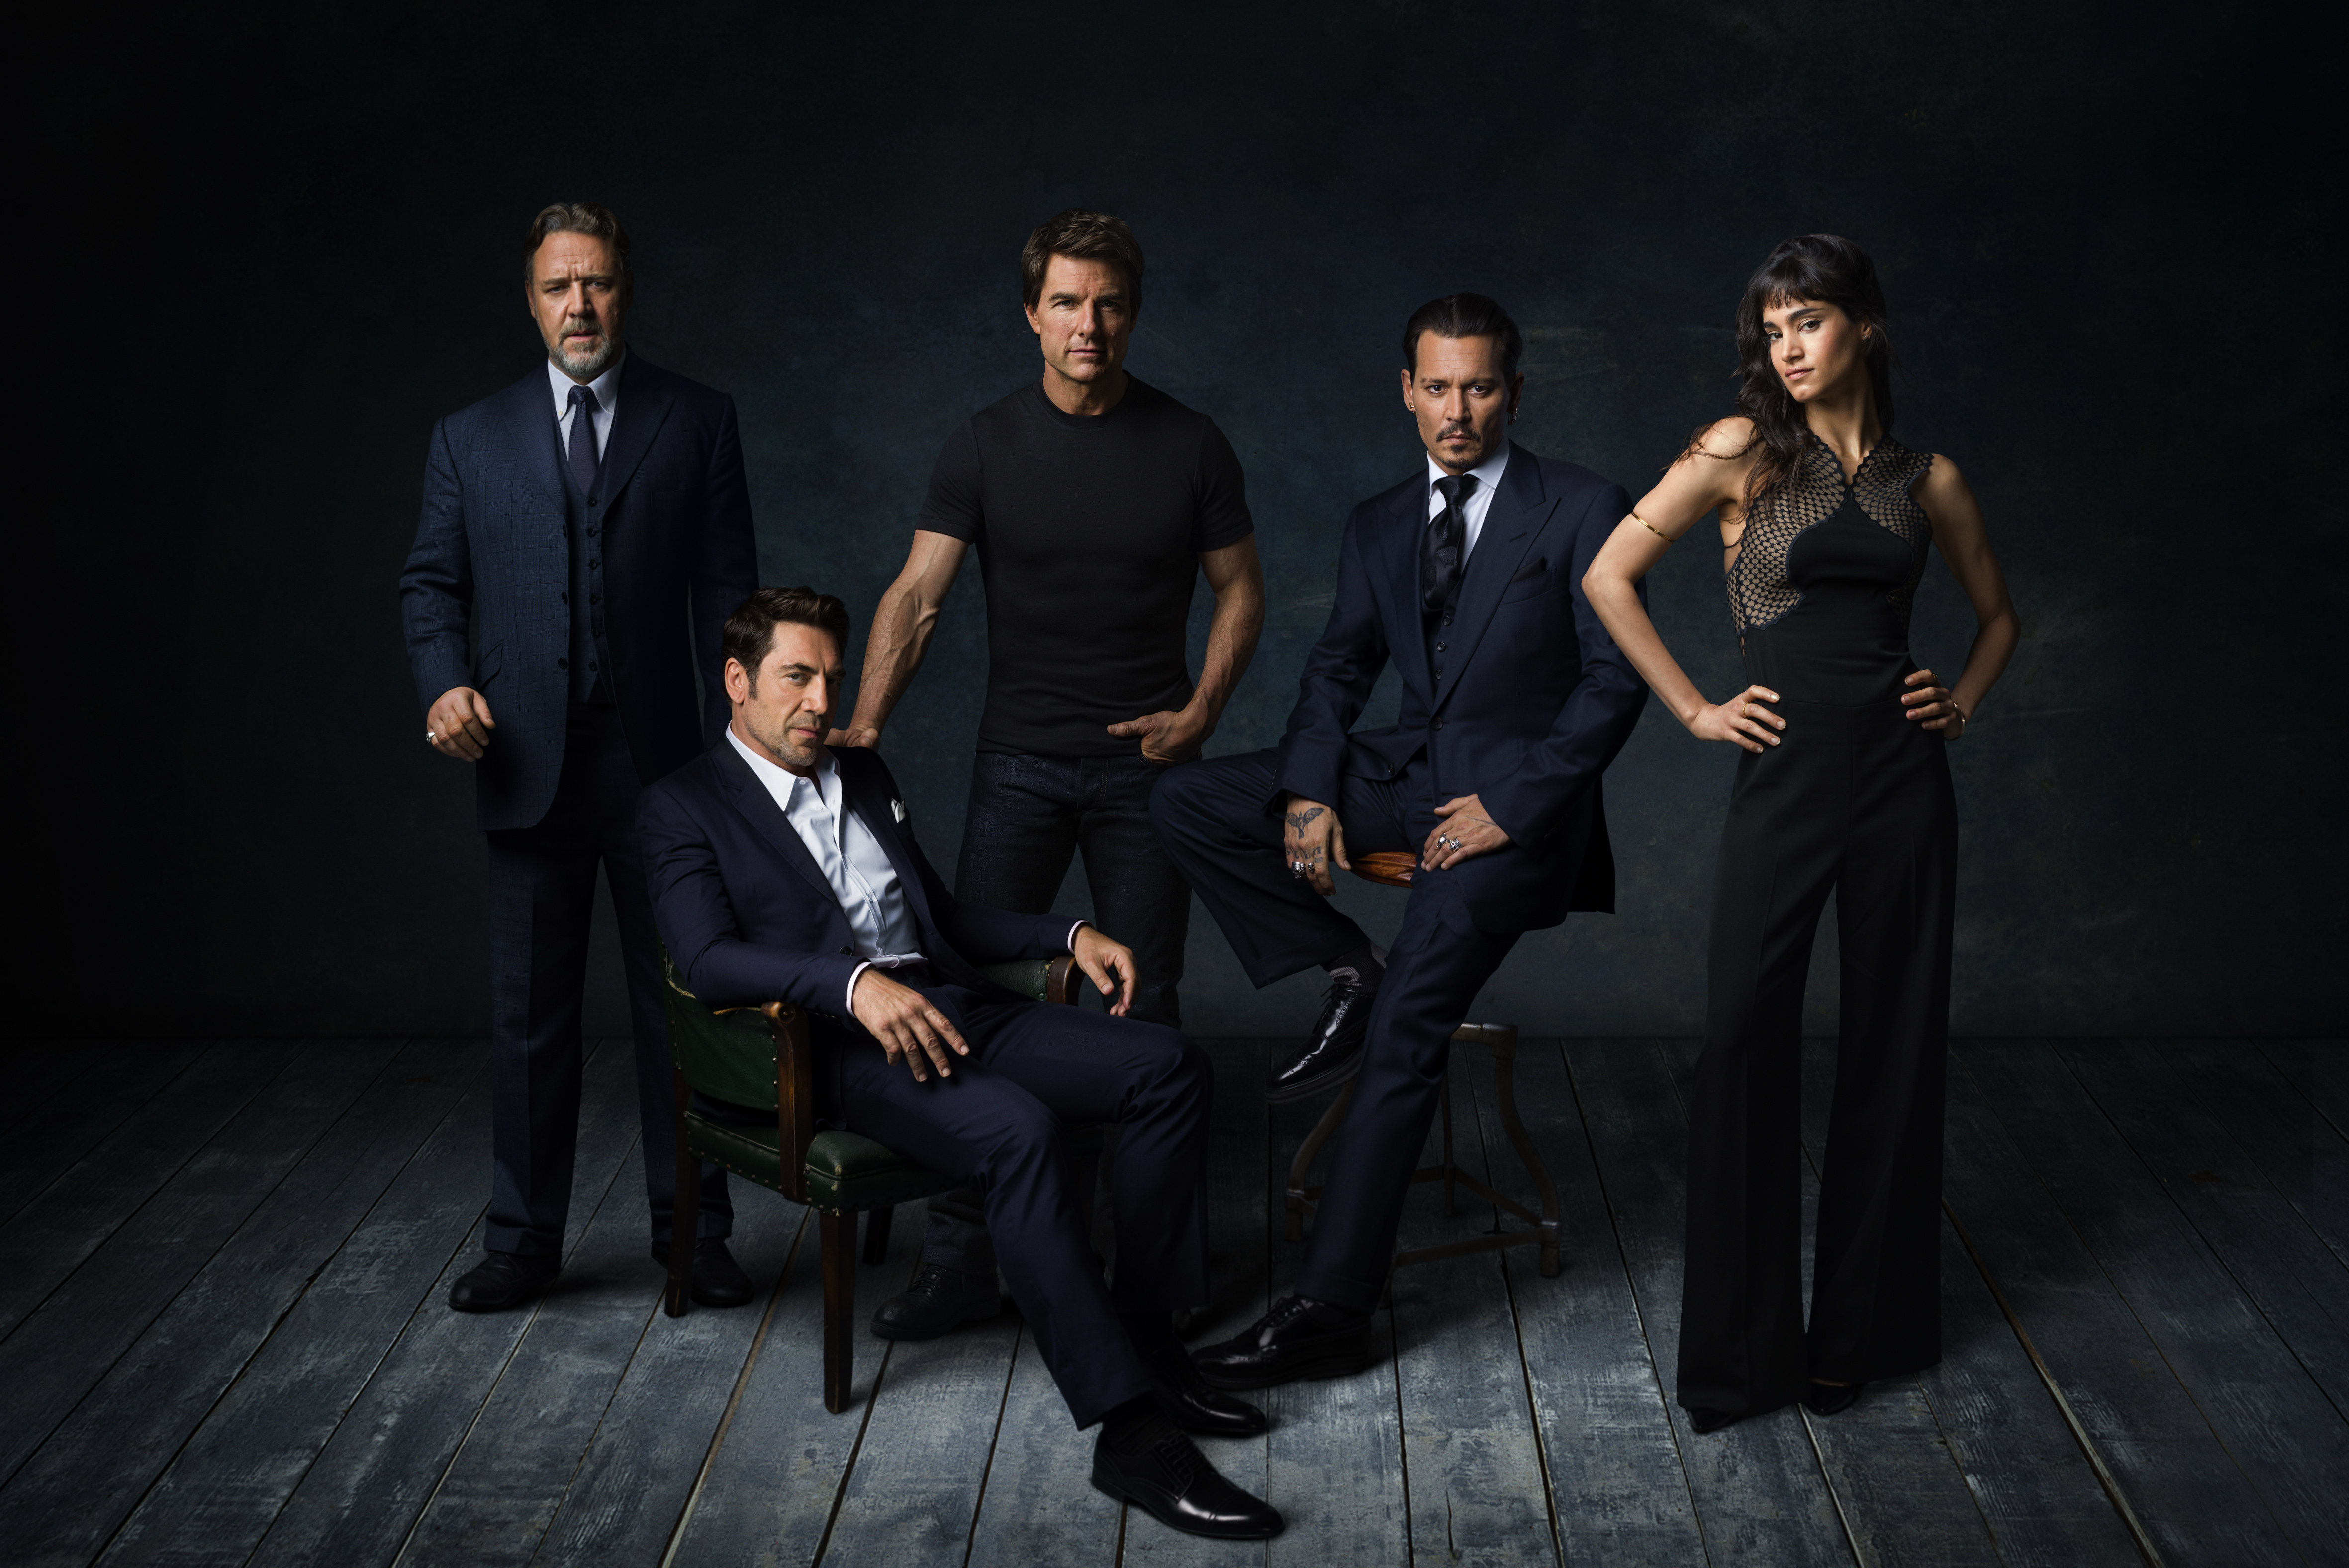 (l-r) Russell Crowe, Javier Bardem, Tom Cruise, Johnny Depp and Sofia Boutella (Universal Pictures)